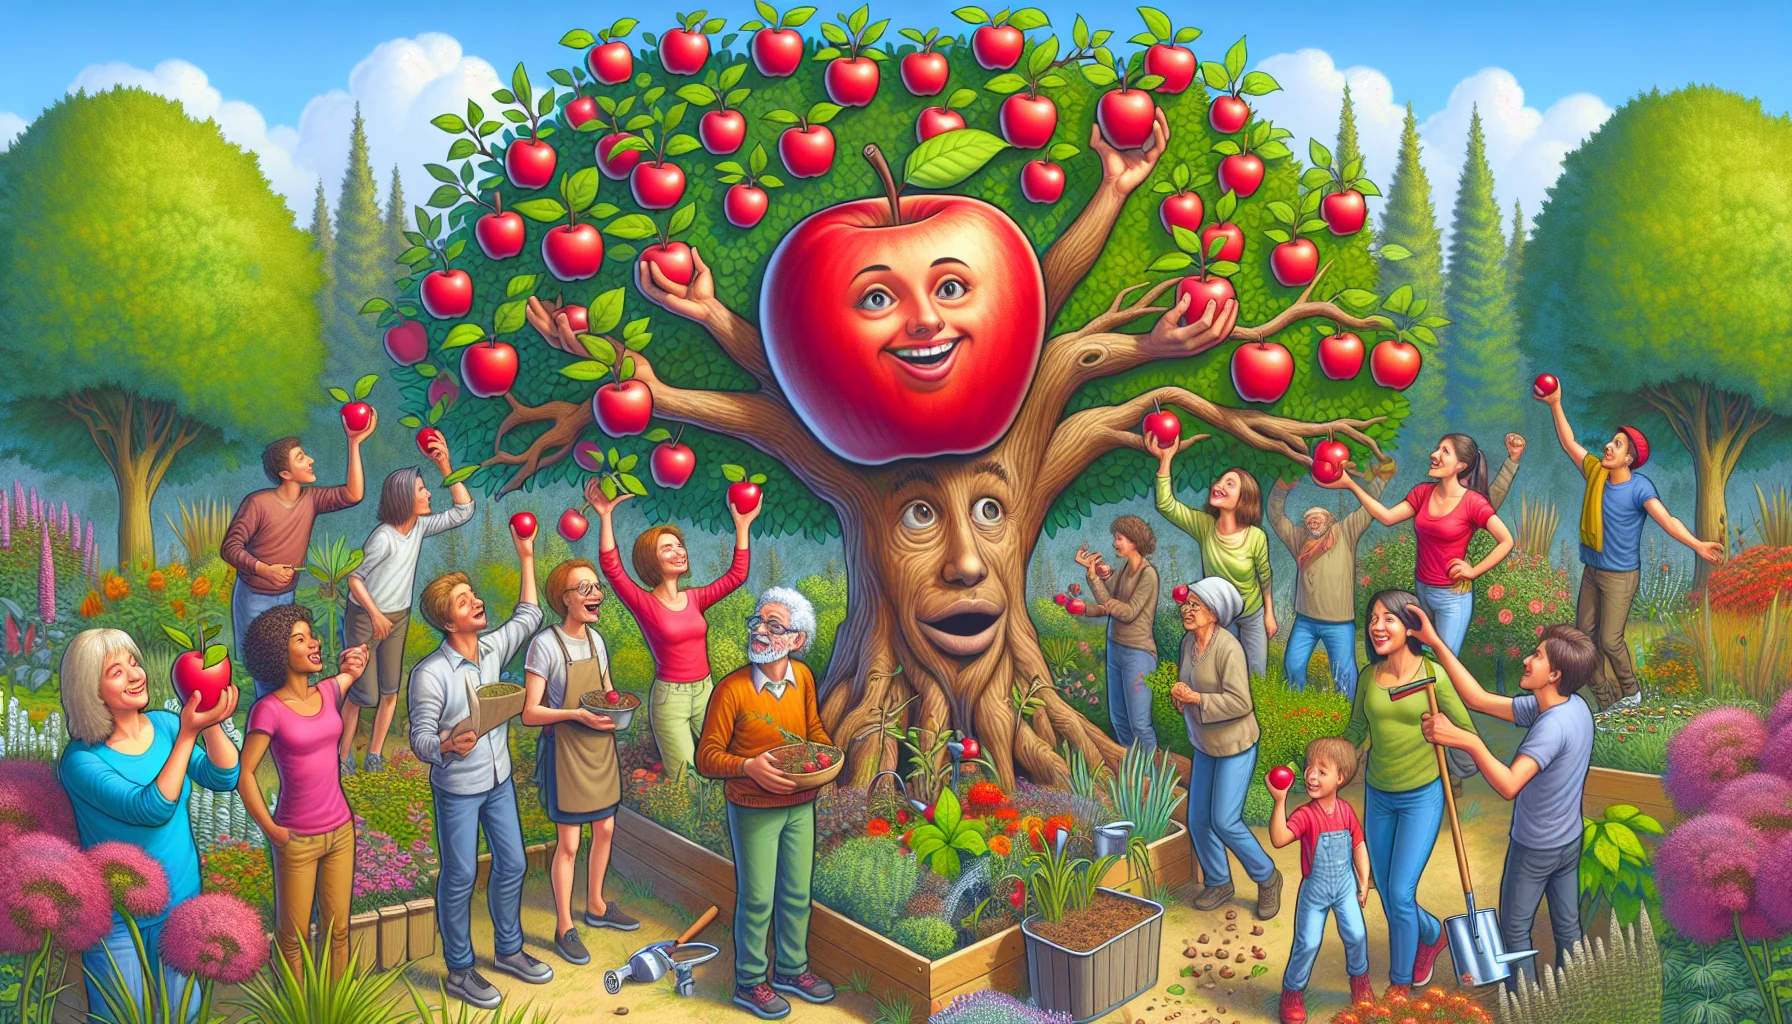 Generate a detailed and humorous image of a Malus Pumila, better known as an apple tree, engaging people with its animated expressions and actions to take part in gardening. Show the tree's branches acting as human arms, waving and offering bright red apples to passersby. Around it should be a lush garden showcasing diverse flora. Various people of different genders and descents such as Caucasian, African, and Asian, of different ages from children to seniors, are happily interacting with the tree, some are planting seeds, watering plants, and others enjoying the fresh apples amidst laughter and enjoyment.